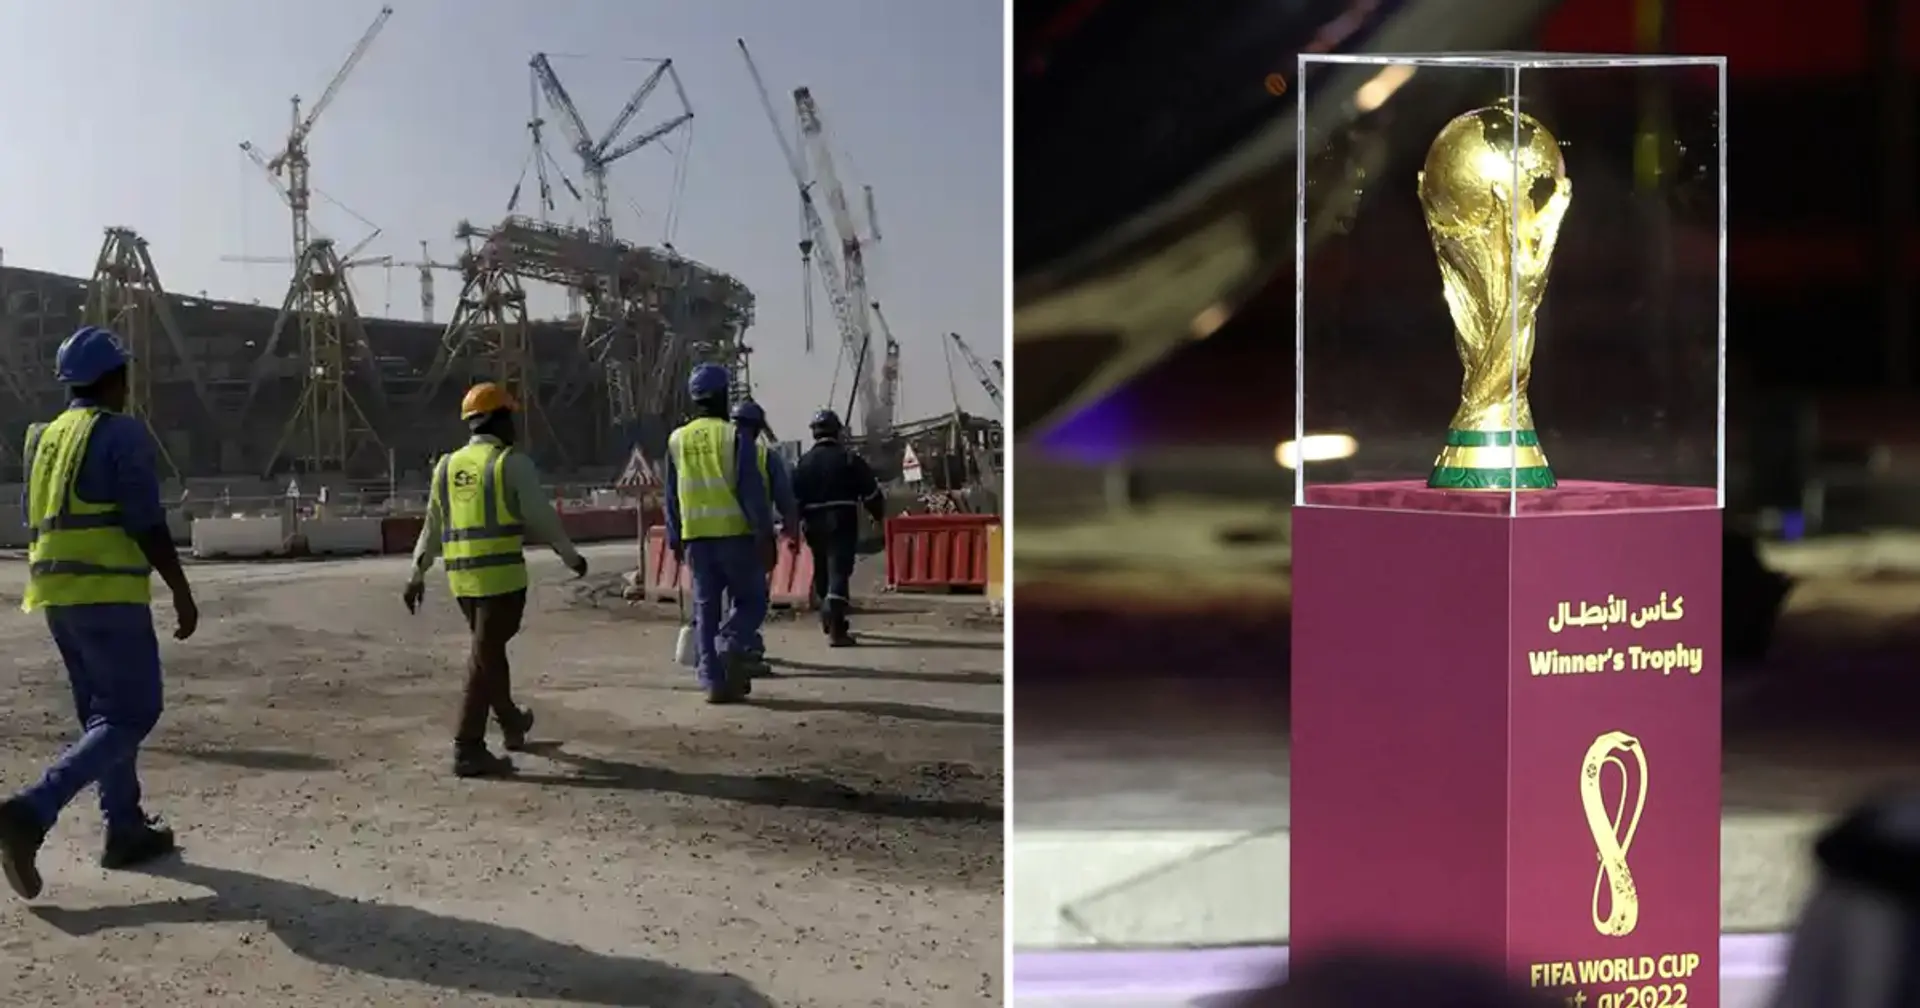 Qatari police held 2 Norwegian journalists investigating World Cup human rights issues for 30 hours